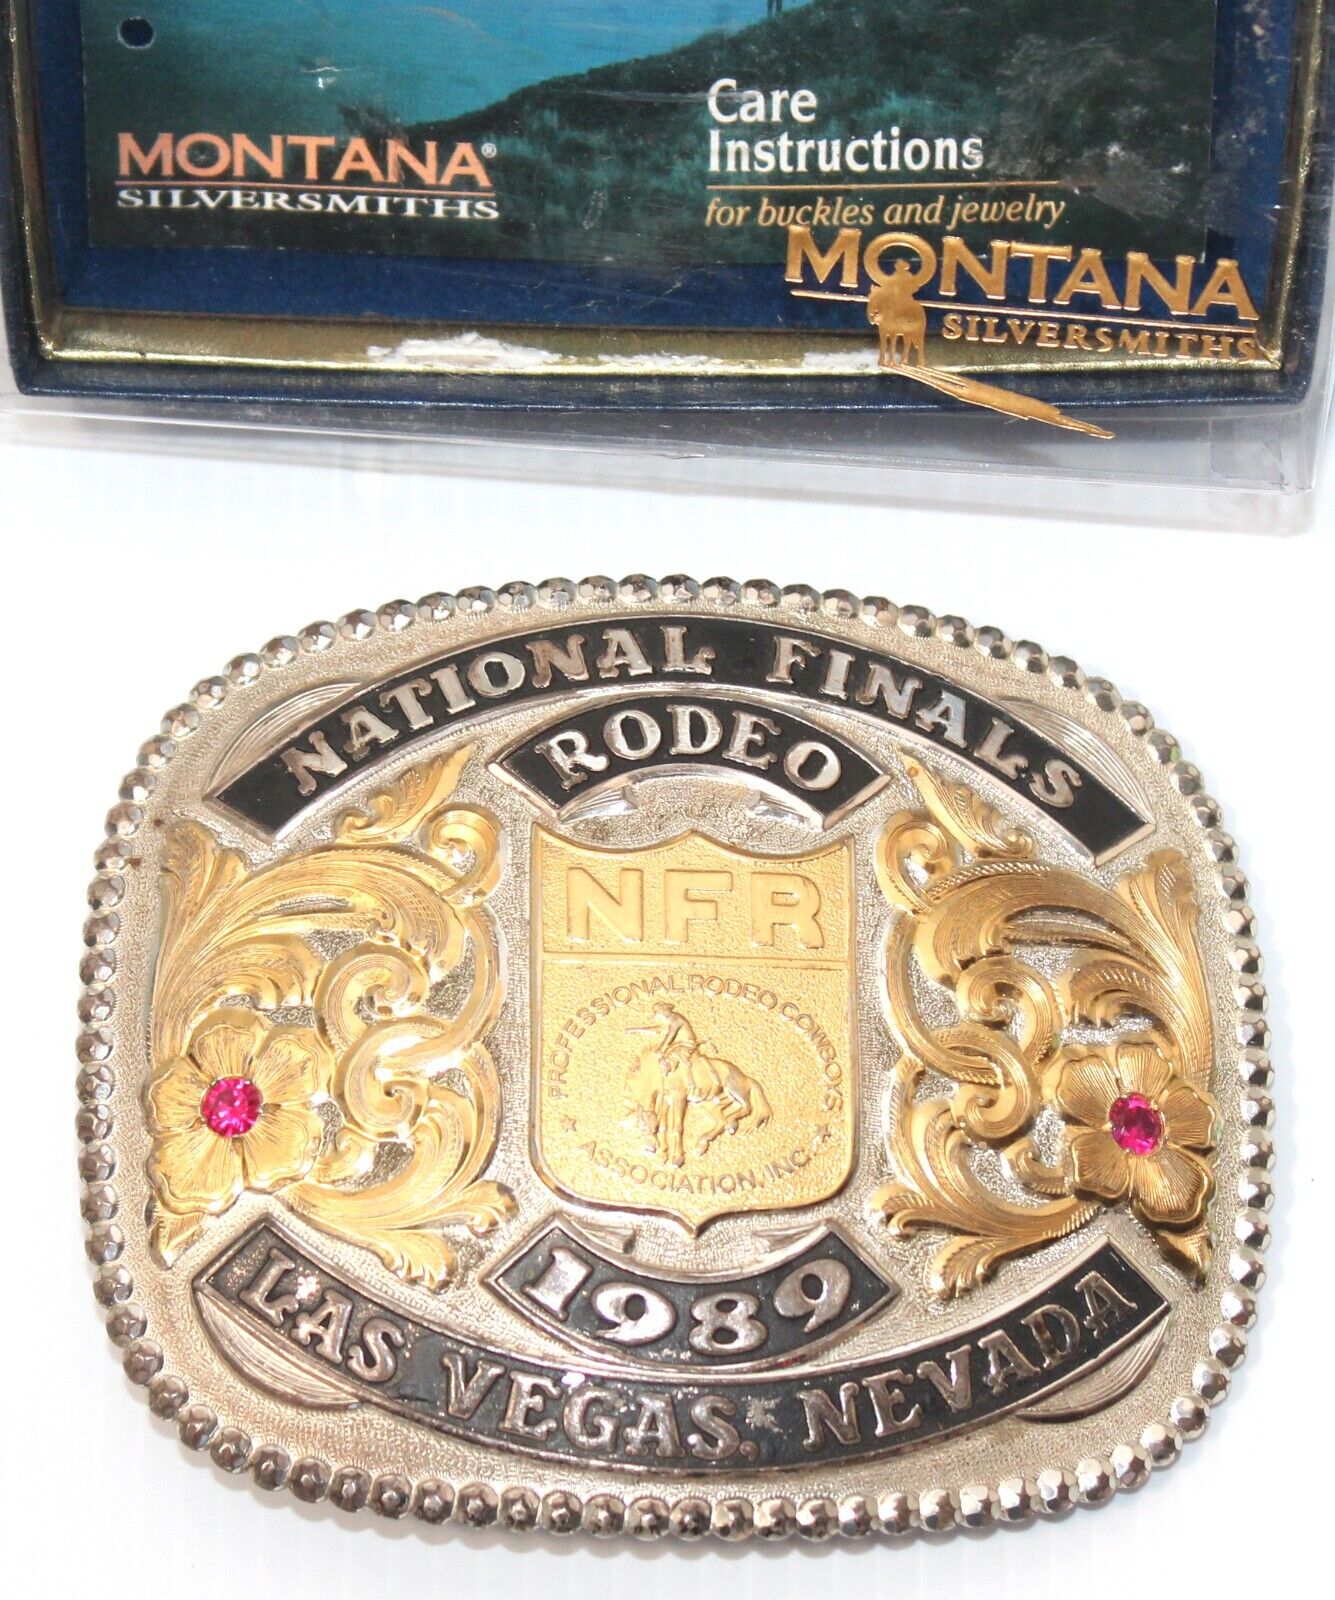 1989 National Finals Rodeo Belt Buckle Gist Sterling Silver Overlay NFR in Box